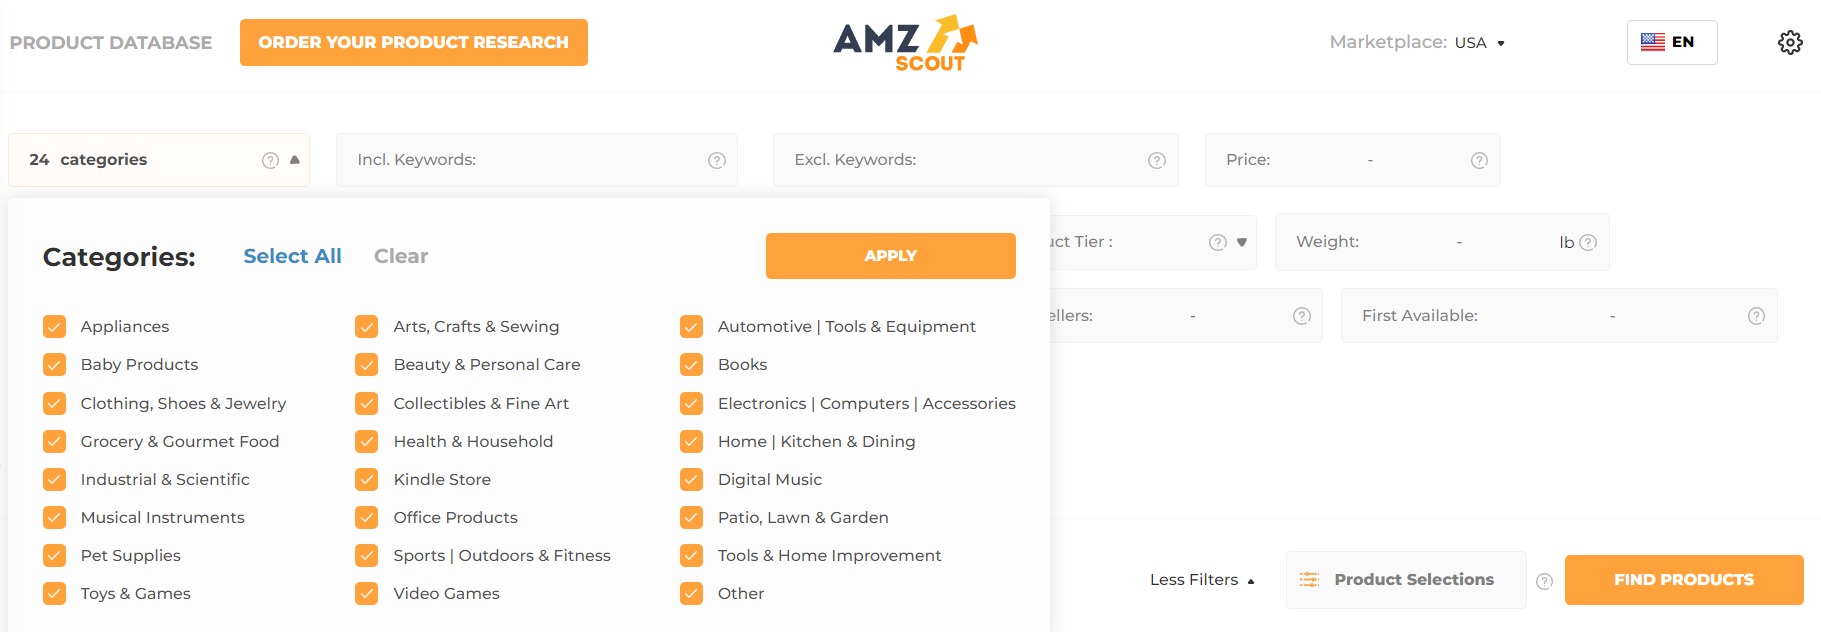 AMZScout Product Database Categories filter